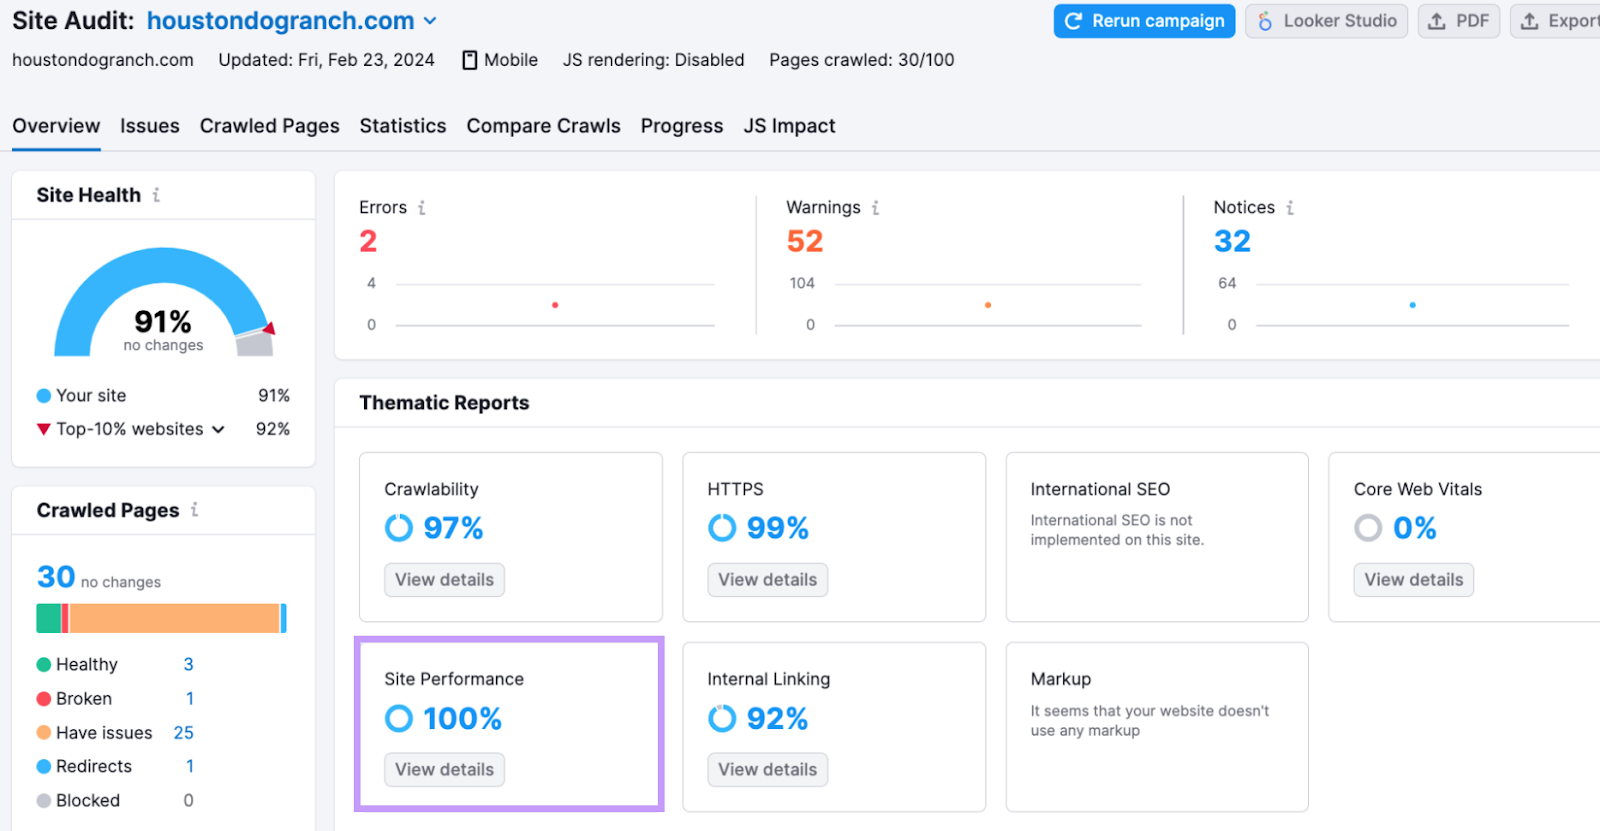 "Site Performance" widget under the Thematic Reports section in Site Audit